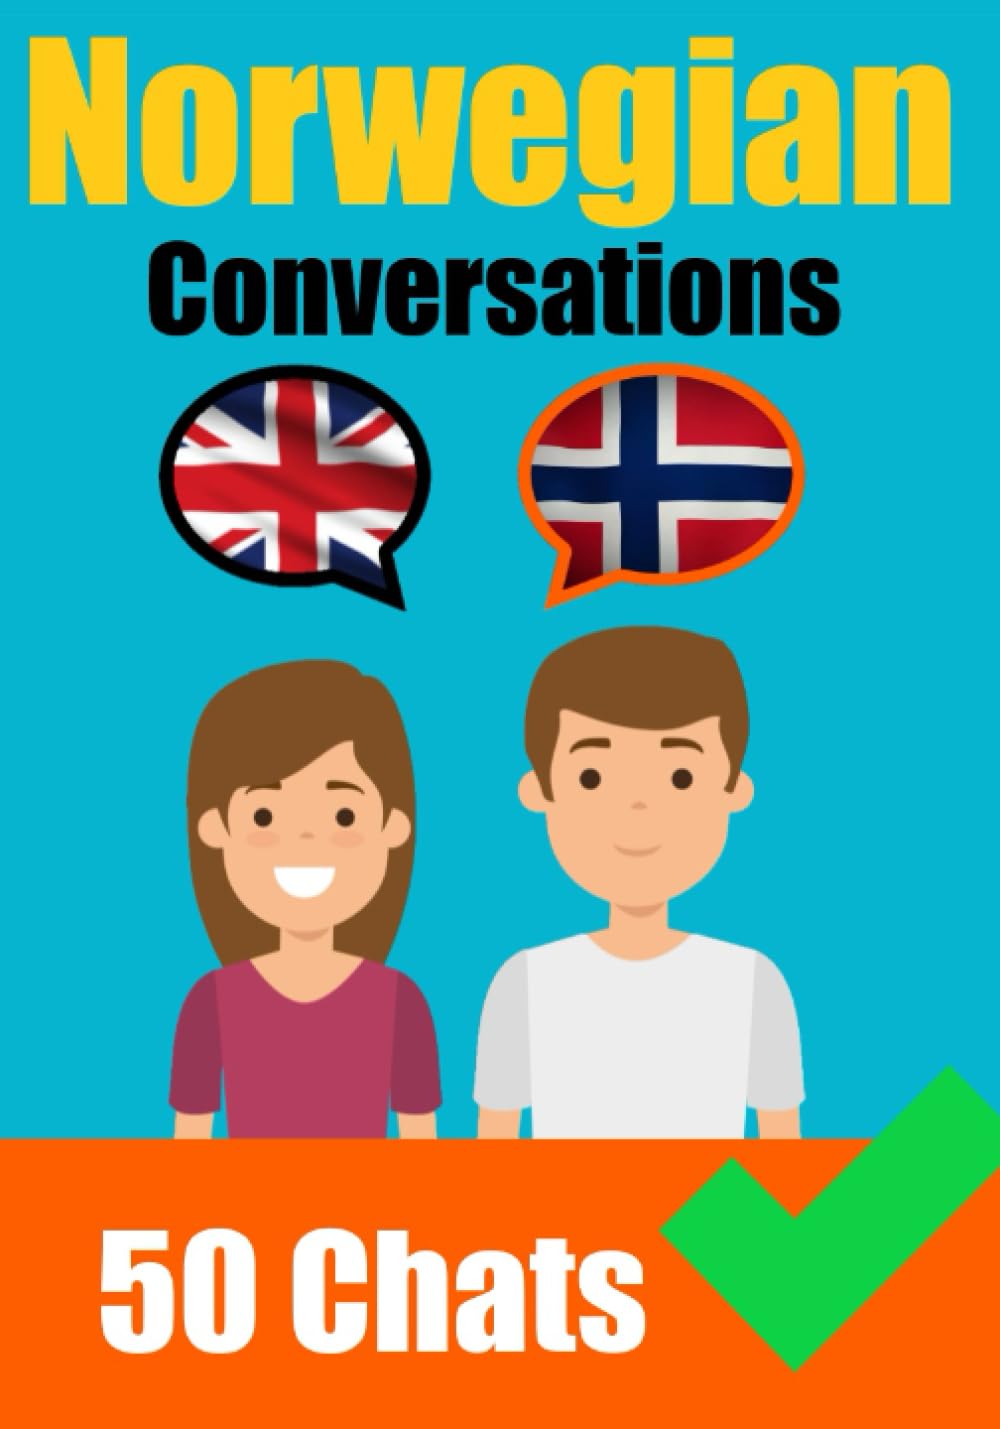 Conversations in Norwegian | English and Norwegian Conversations Side by Side - Skriuwer.com